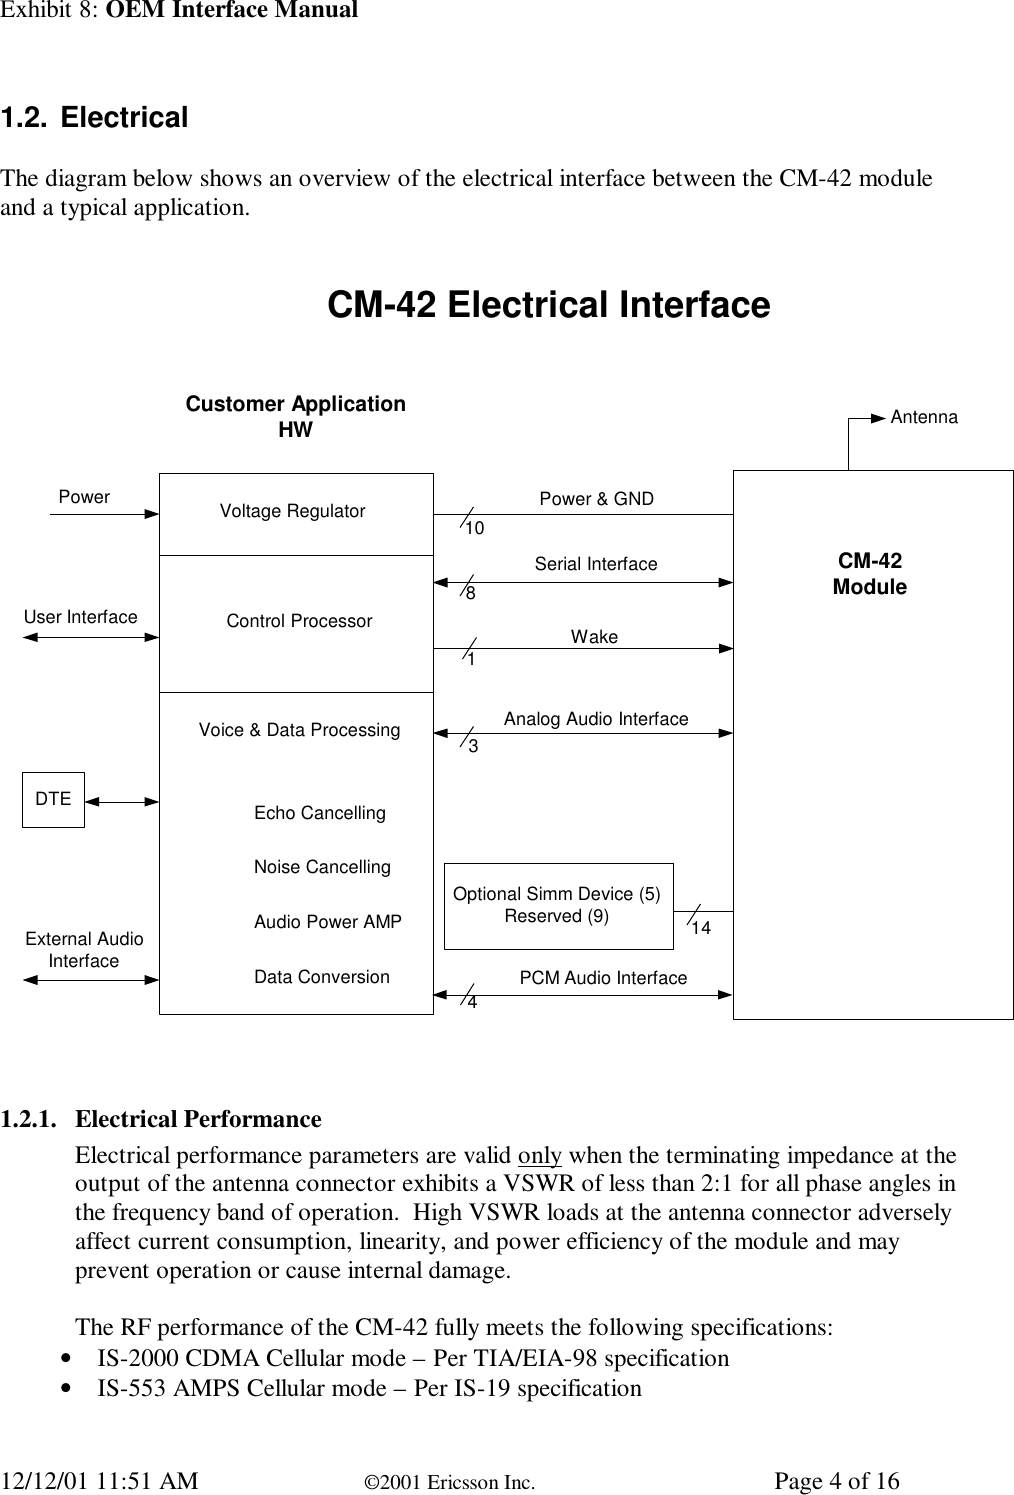 Exhibit 8: OEM Interface Manual12/12/01 11:51 AM ©2001 Ericsson Inc. Page 4 of 161.2. ElectricalThe diagram below shows an overview of the electrical interface between the CM-42 moduleand a typical application.CM-42 Electrical InterfaceCustomer ApplicationHWVoltage RegulatorControl ProcessorVoice &amp; Data ProcessingŸEcho CancellingŸNoise CancellingŸAudio Power AMPŸData ConversionDTEPowerExternal AudioInterfaceAntennaUser Interface8Power &amp; GNDSerial InterfaceWakeAnalog Audio Interface1013144Optional Simm Device (5)Reserved (9)CM-42ModulePCM Audio Interface1.2.1. Electrical PerformanceElectrical performance parameters are valid only when the terminating impedance at theoutput of the antenna connector exhibits a VSWR of less than 2:1 for all phase angles inthe frequency band of operation.  High VSWR loads at the antenna connector adverselyaffect current consumption, linearity, and power efficiency of the module and mayprevent operation or cause internal damage.The RF performance of the CM-42 fully meets the following specifications:• IS-2000 CDMA Cellular mode – Per TIA/EIA-98 specification• IS-553 AMPS Cellular mode – Per IS-19 specification